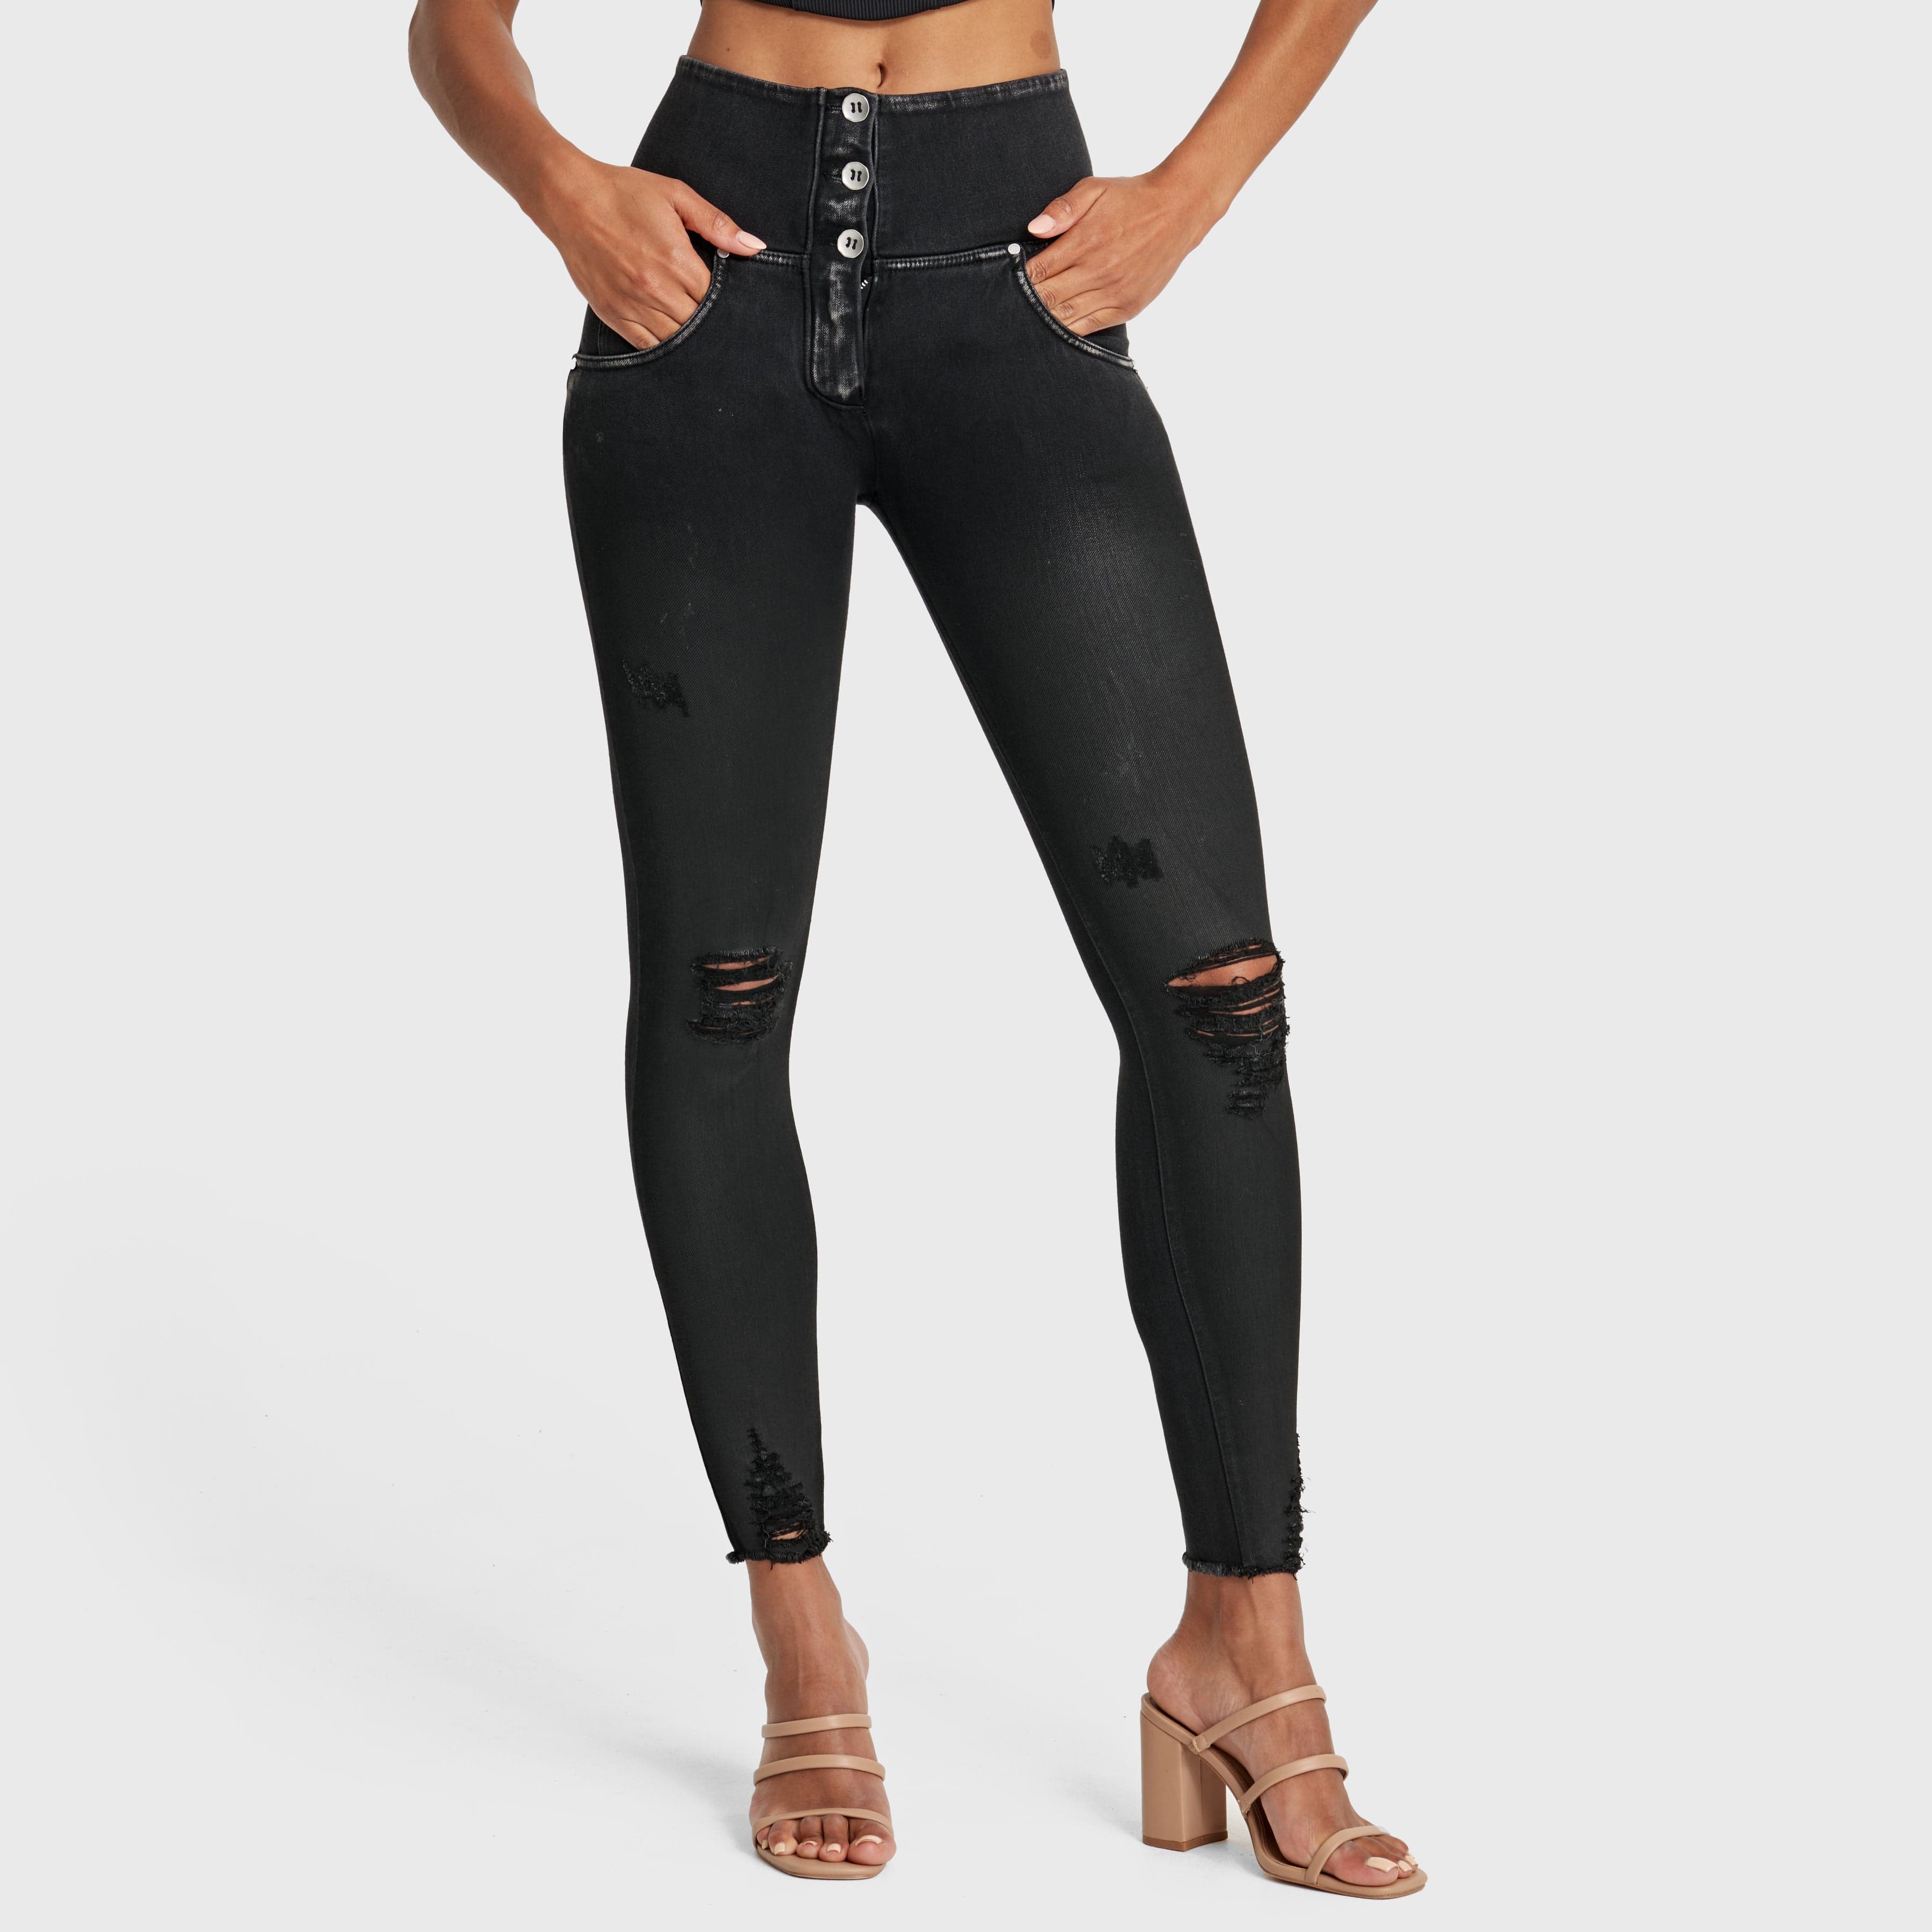 WR.UP® Snug Ripped Jeans - High Waisted - Full Length - Coated Black + Black Stitching 1